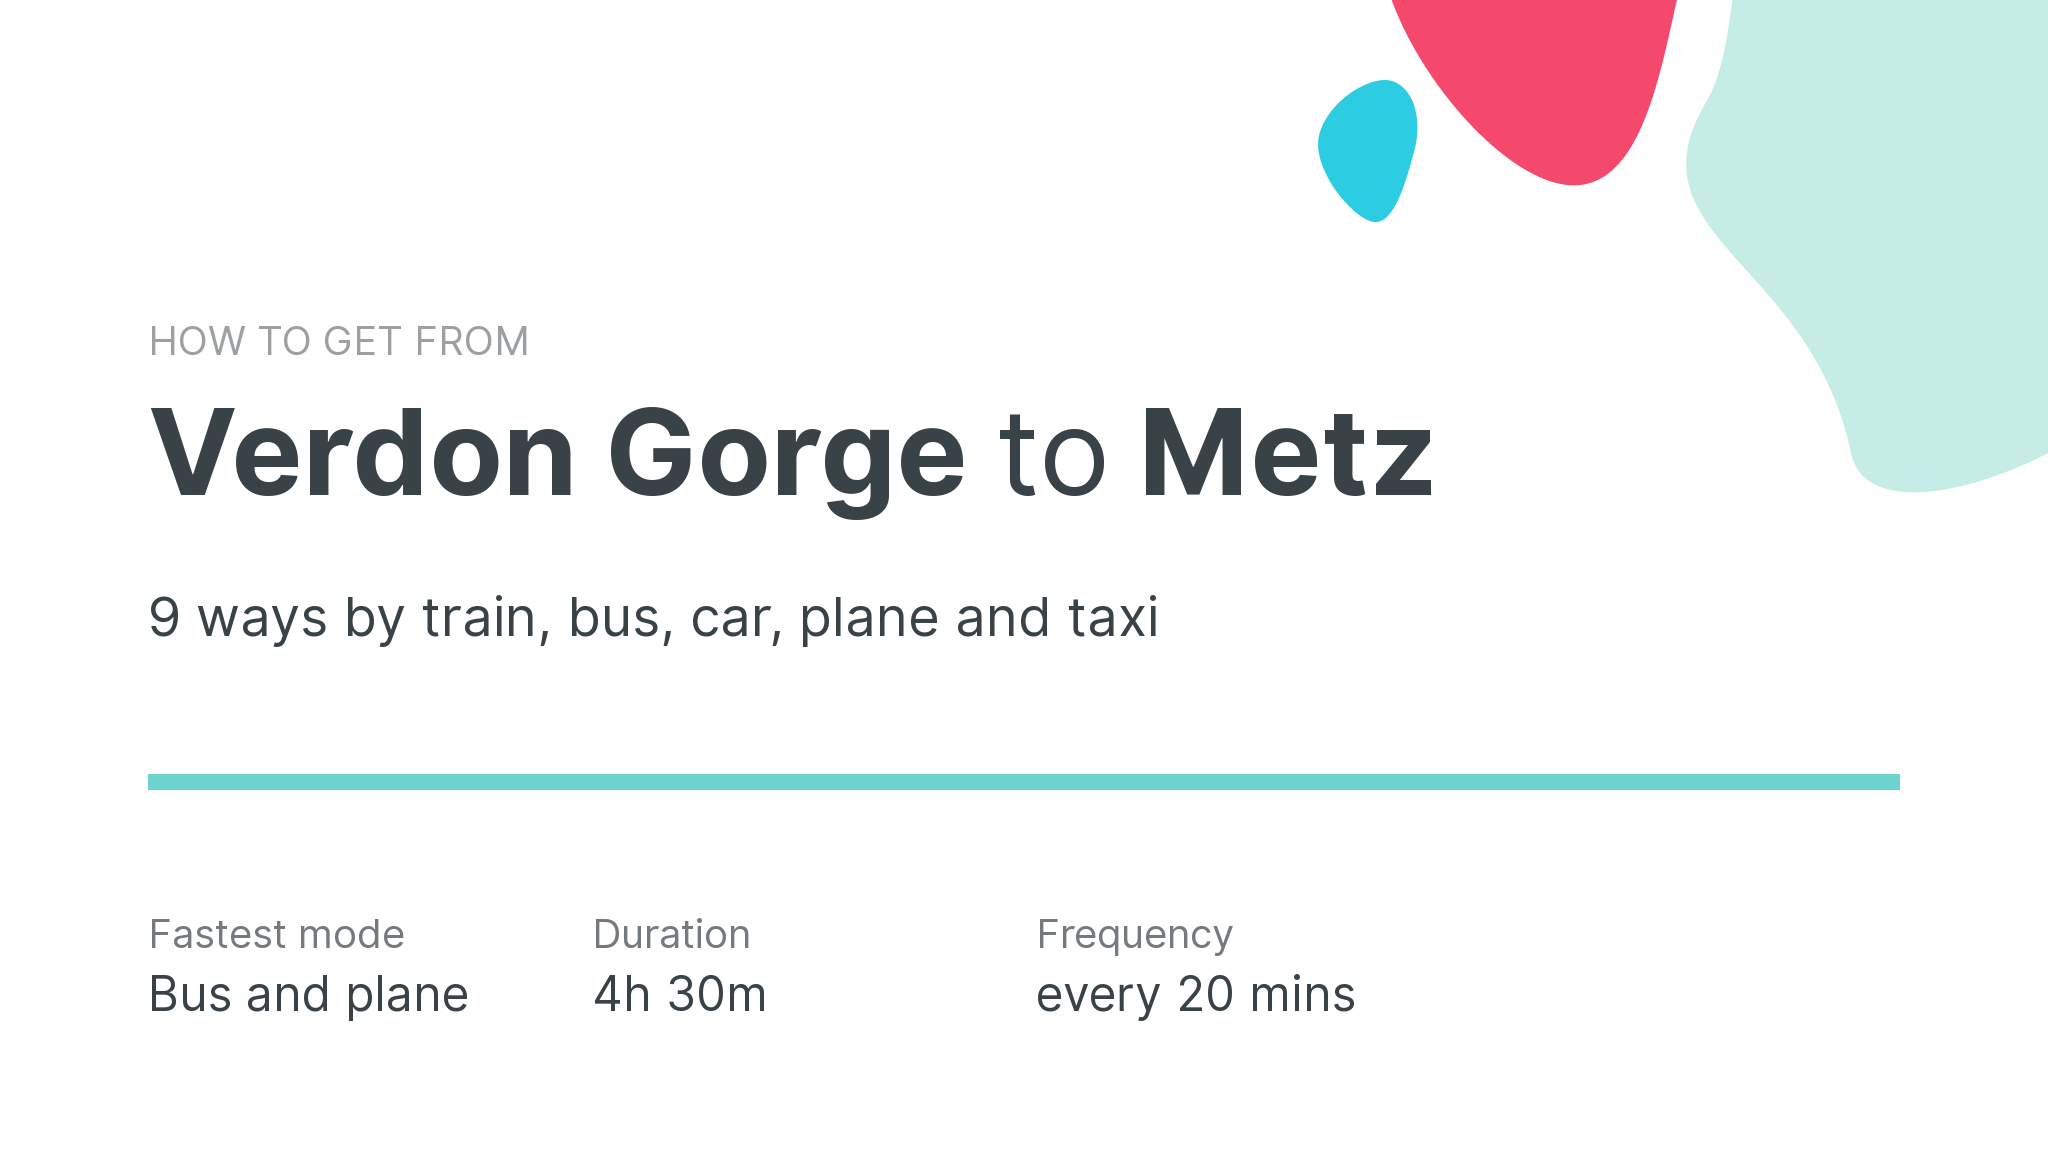 How do I get from Verdon Gorge to Metz